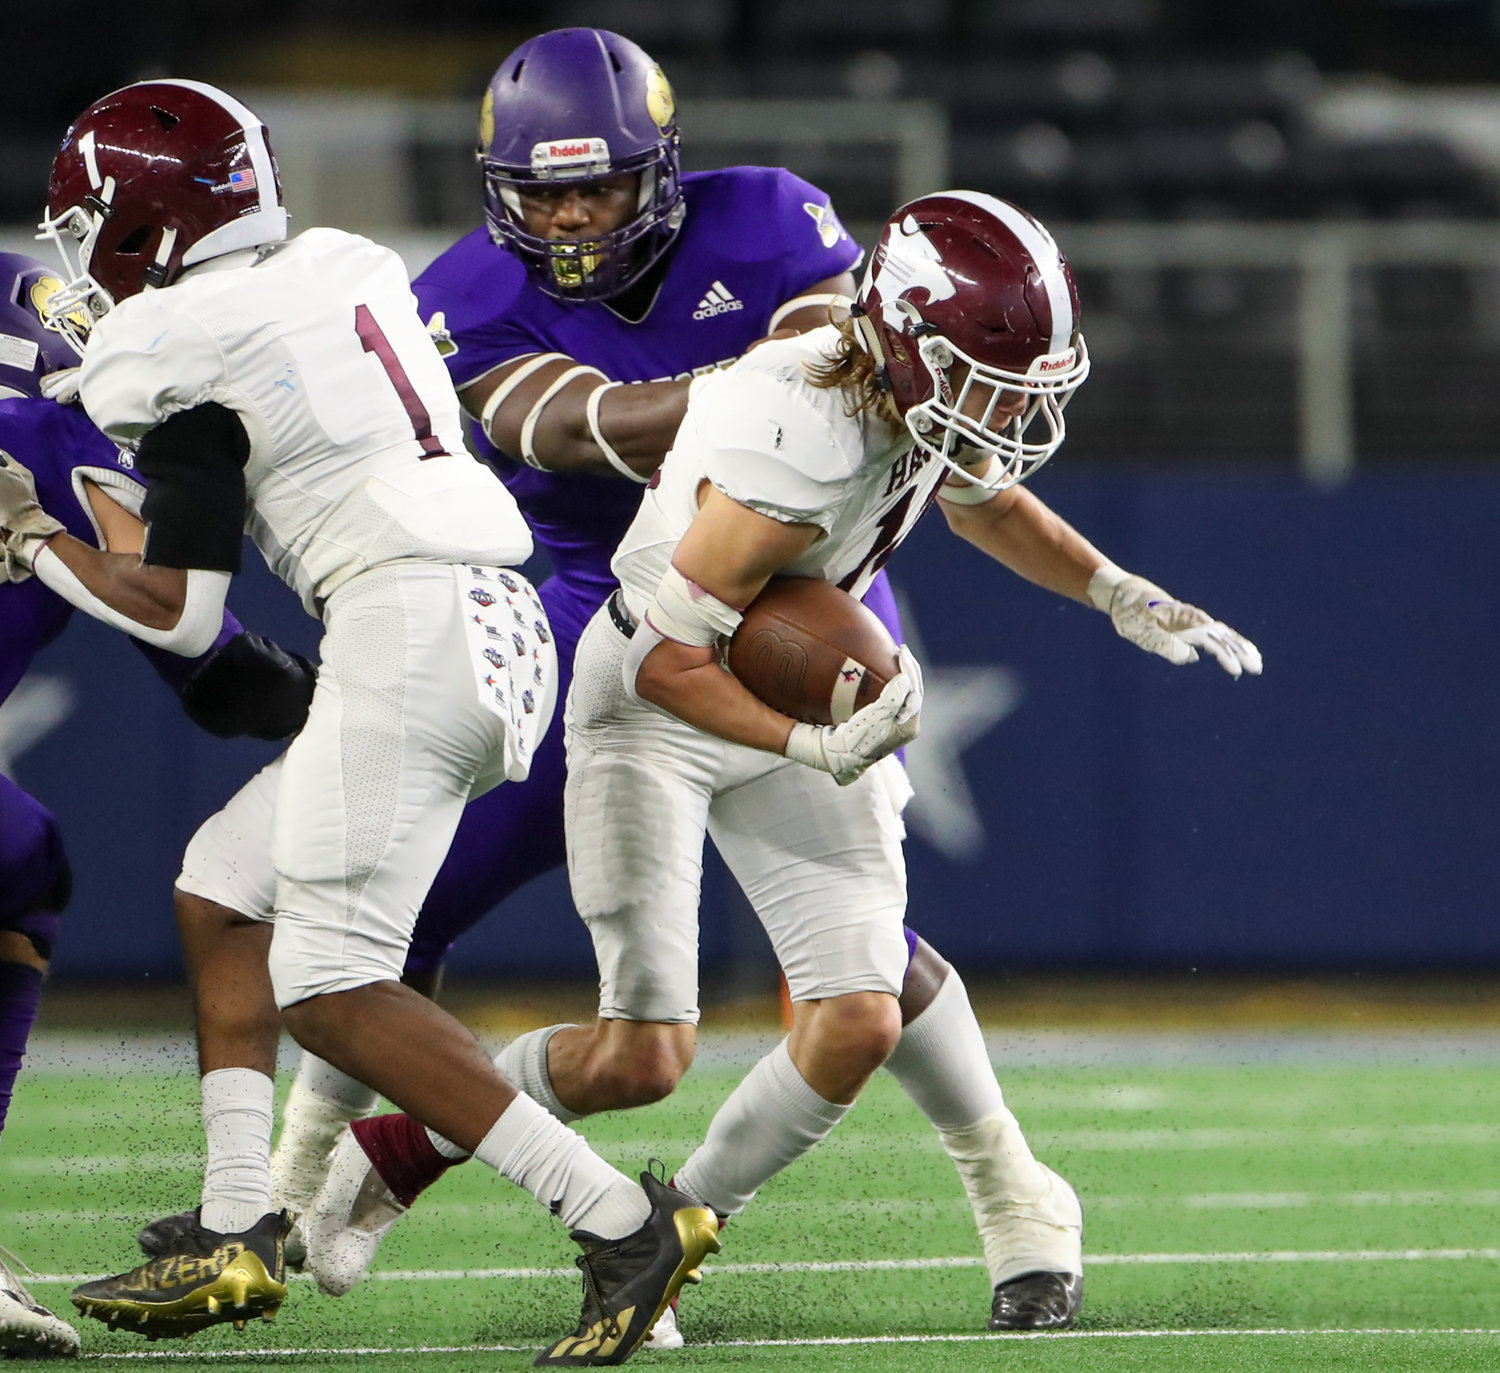 Shiner Comanches senior Doug Brooks (1) wraps up Hawley Bearcats junior Austin Cumpton (12) for a sack during the Class 2A Division I state football championship game between Shiner and Hawley on December 15, 2021 in Arlington, Texas.